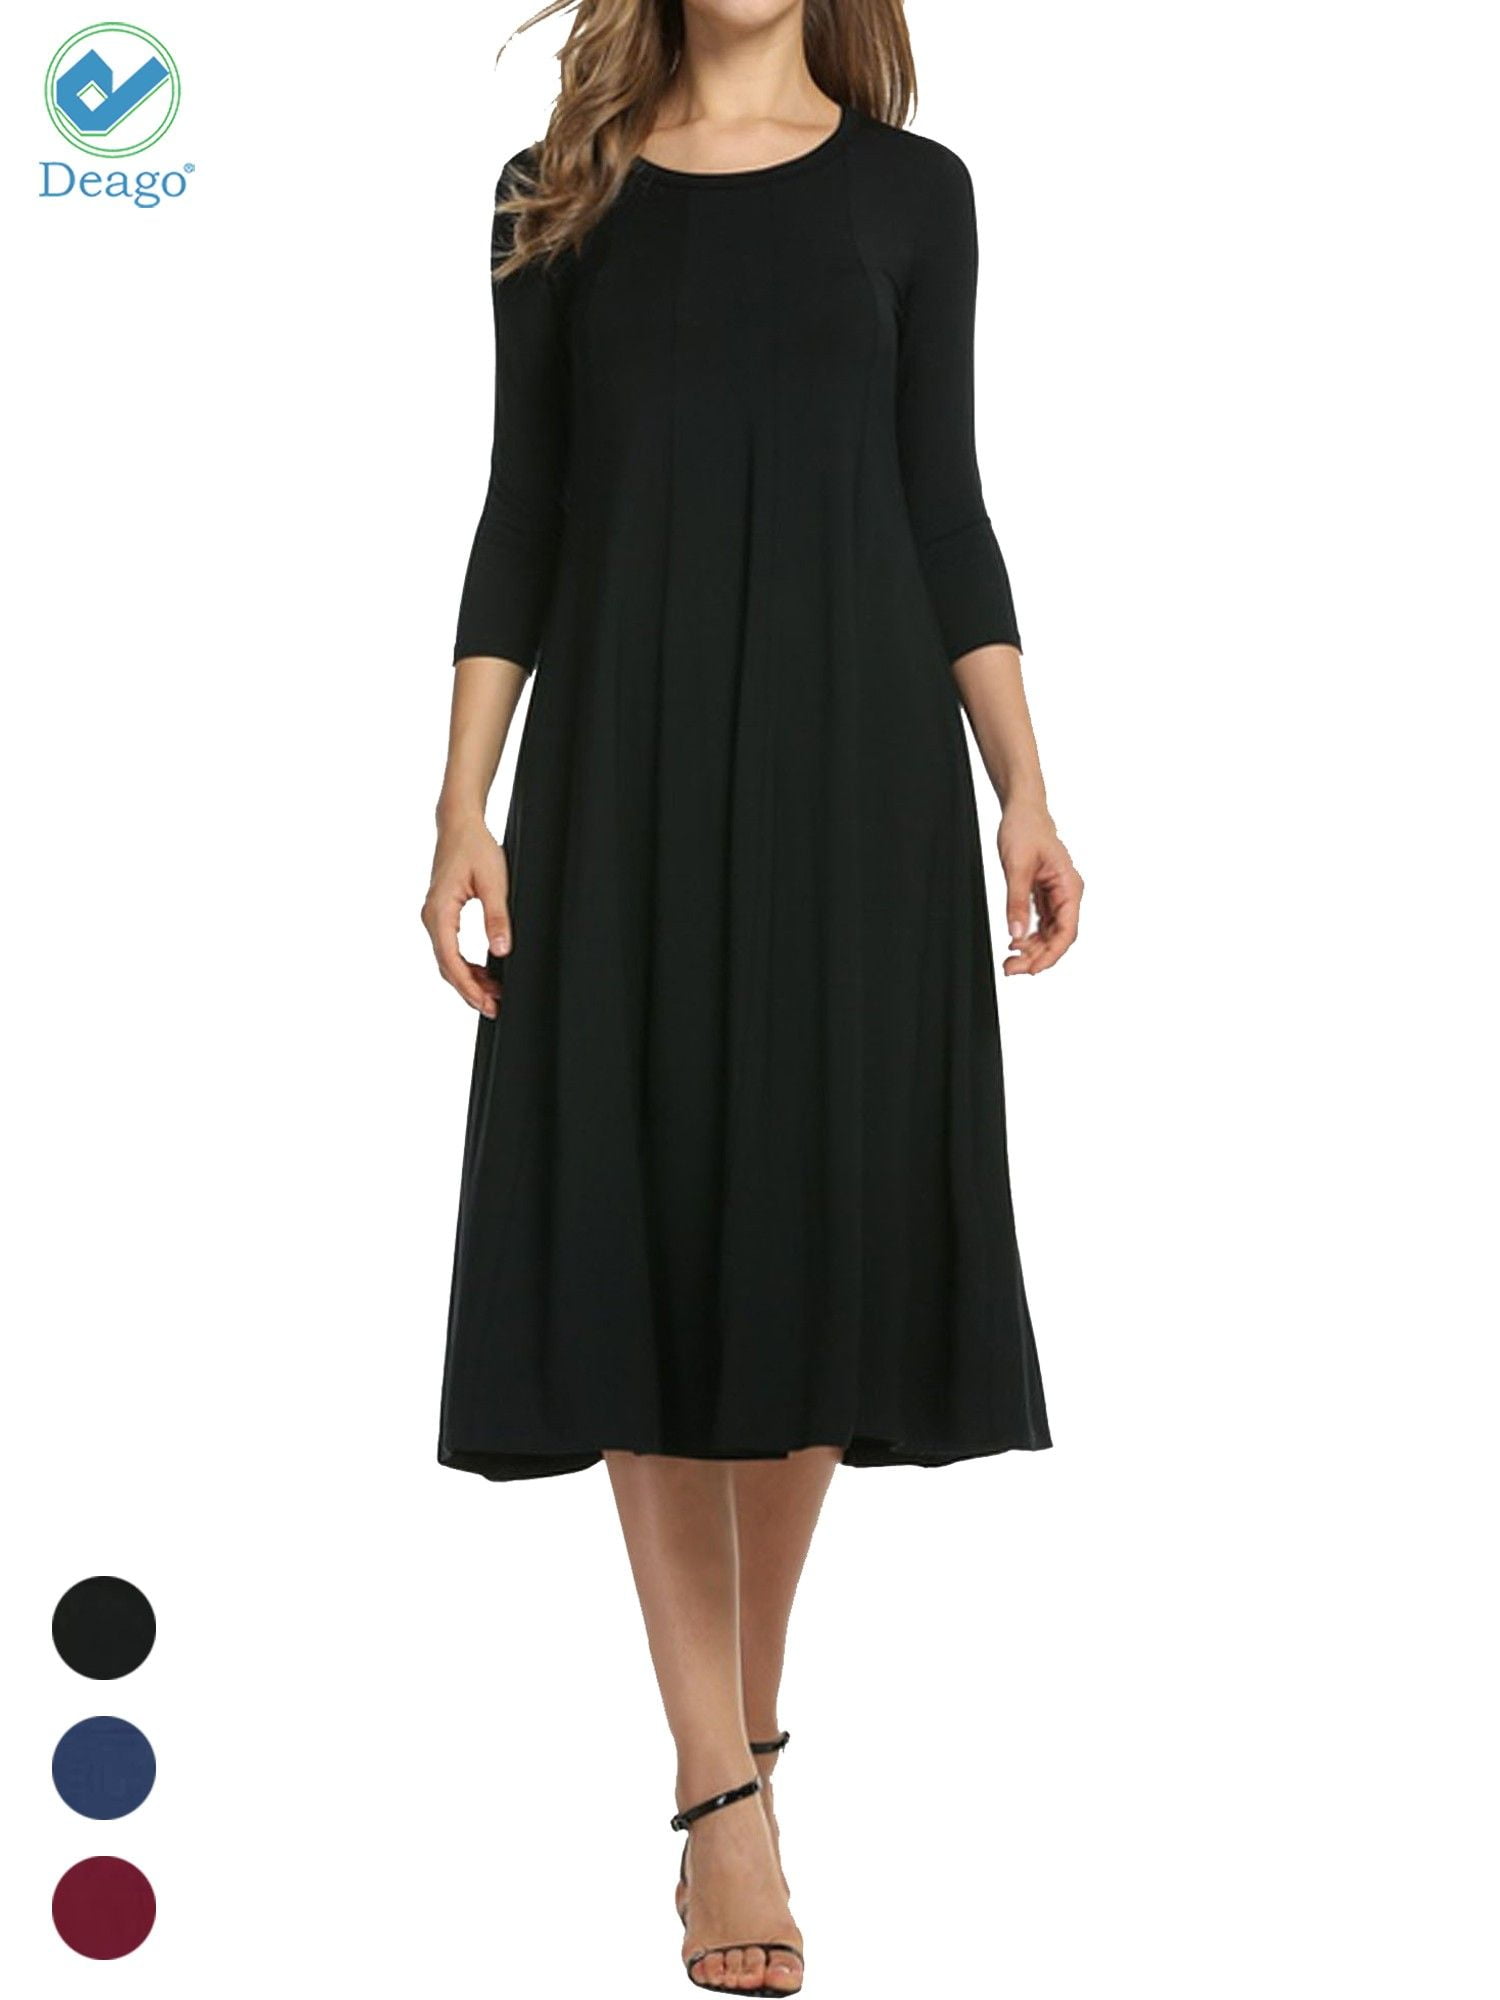 Deago Women's Casual Dresses 3/4 Sleeve Round Neck A-line and Flare Midi  Long Dress For Spring Summer Fall (Black, 2XL) - Walmart.com